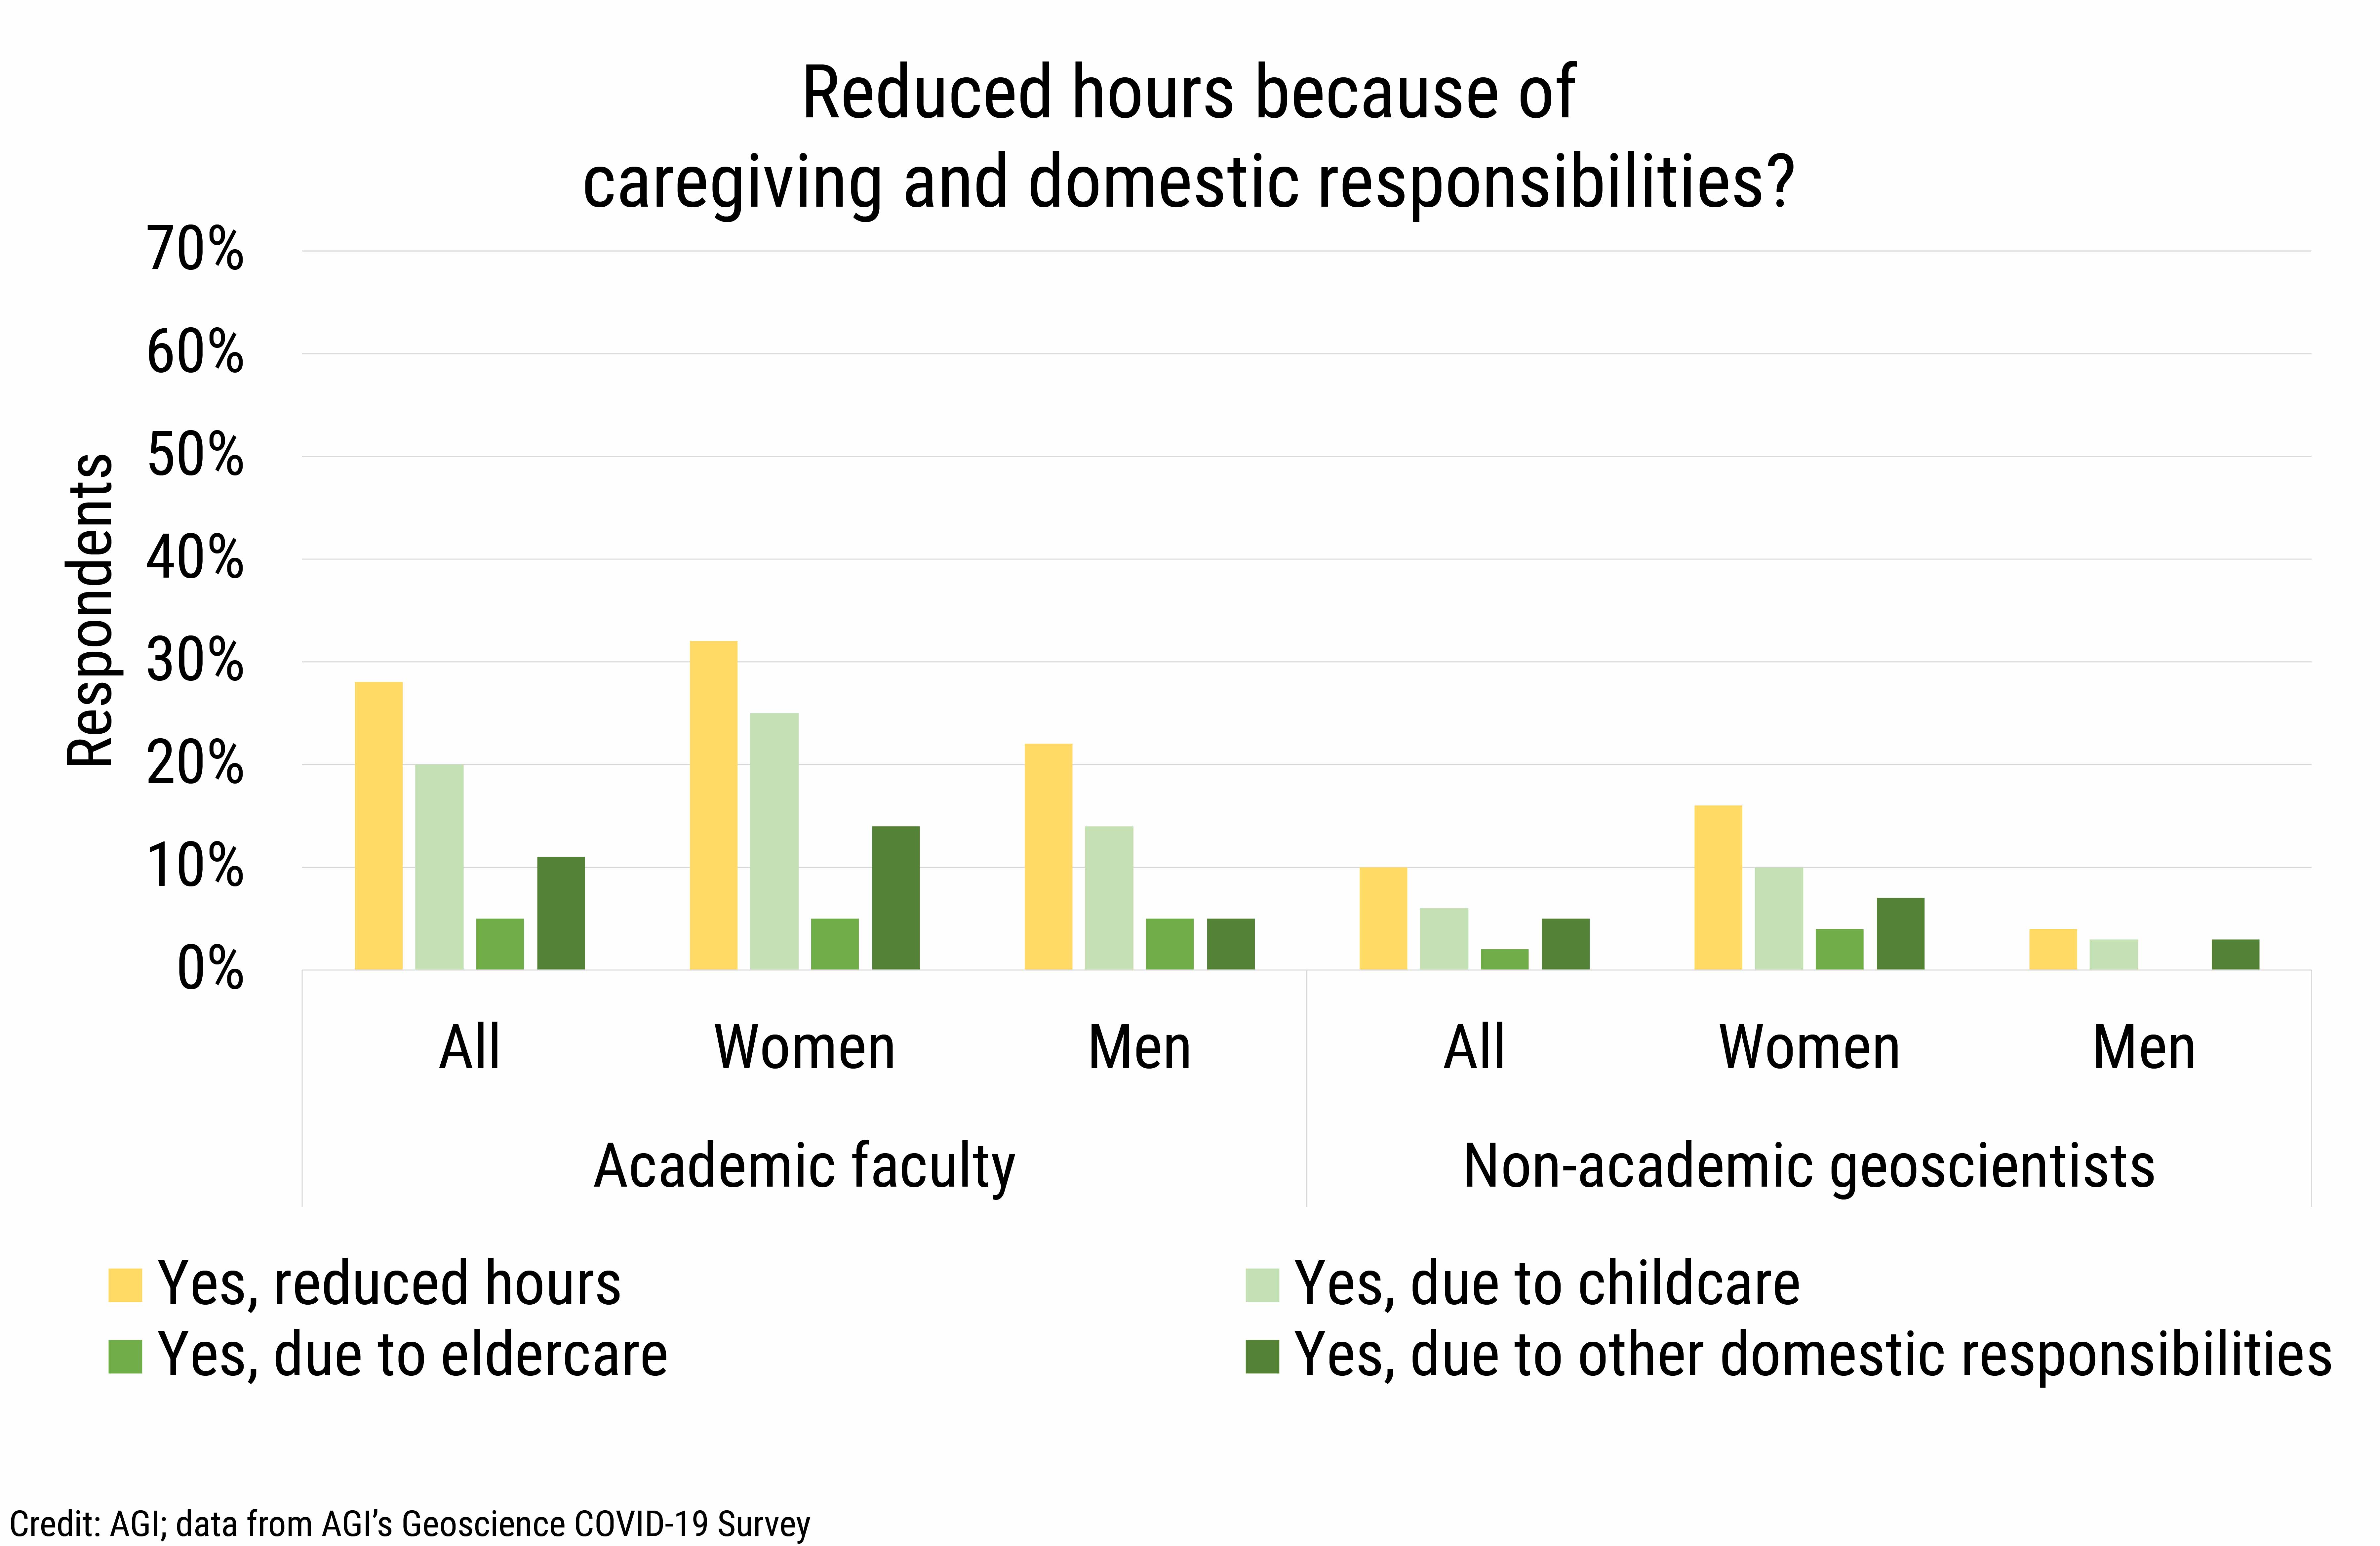 DB_2021-020 chart 02: Reduced hours because of caregiving and domestic responsibilties? (Credit: AGI; data from AGI&#039;s Geoscience COVID-19 Survey)